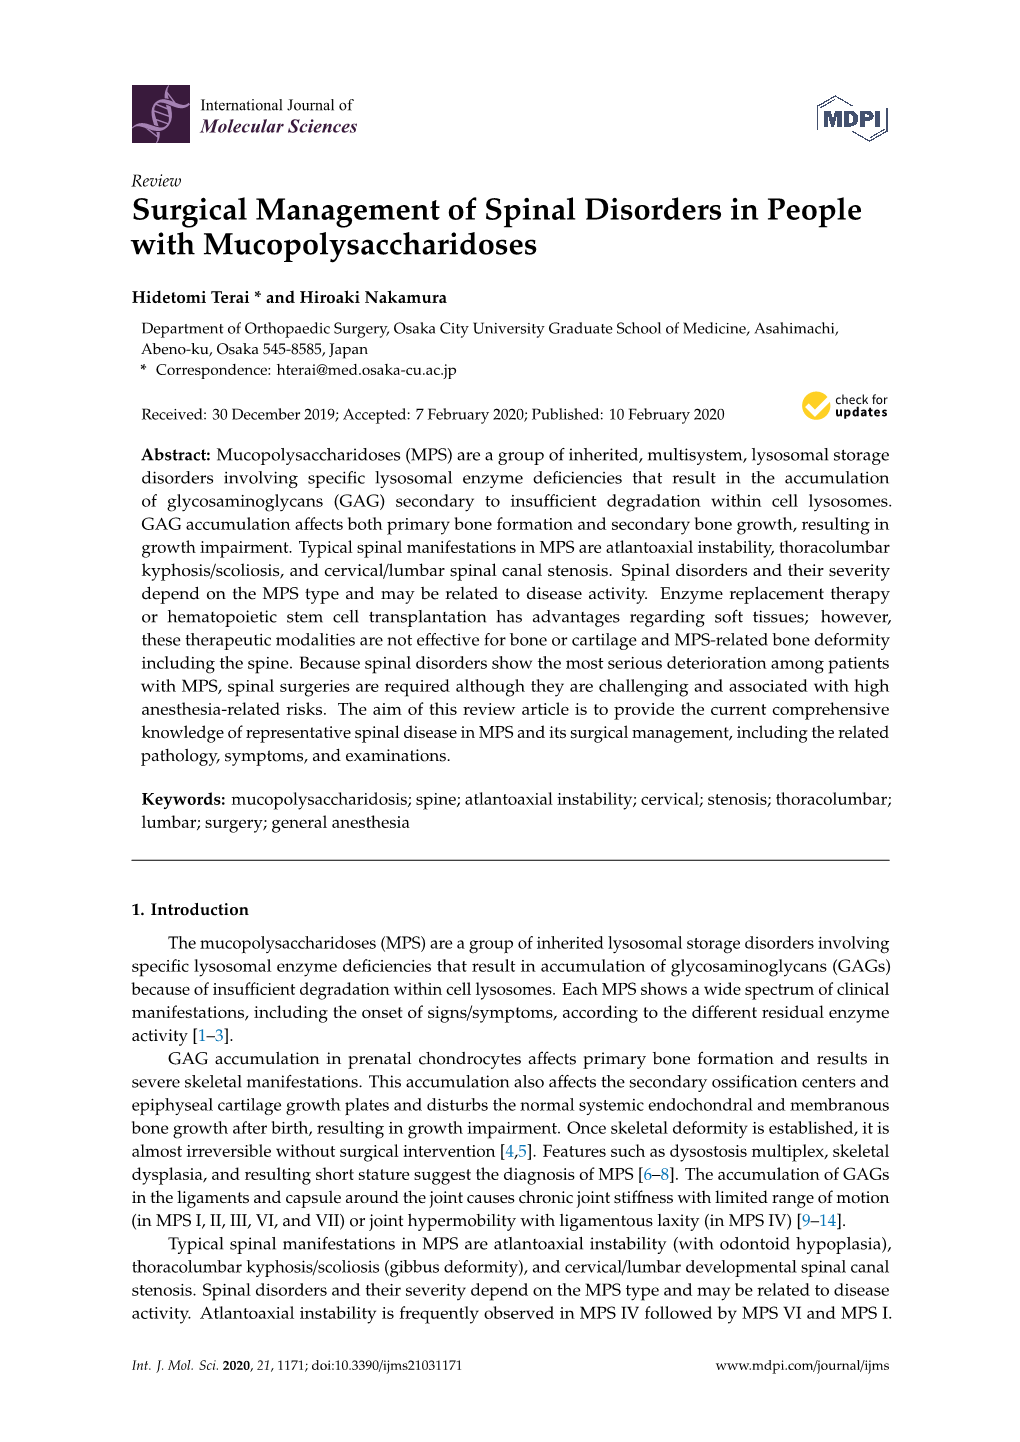 Surgical Management of Spinal Disorders in People with Mucopolysaccharidoses